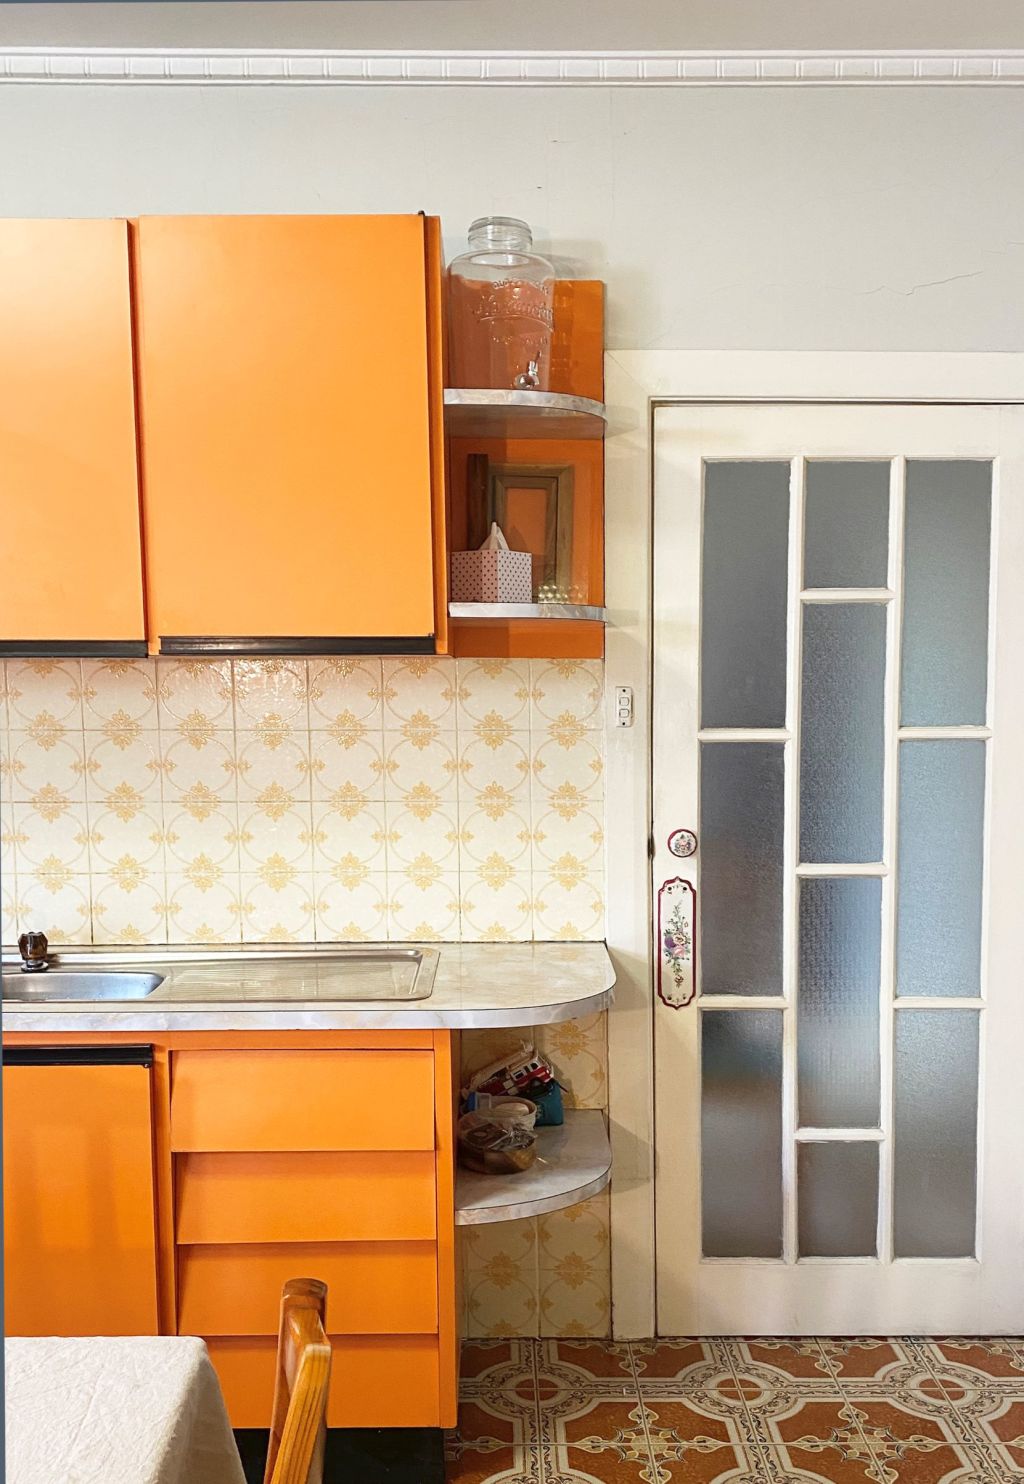 The 1970s renovation introduced a riot of pattern and colour to the kitchen. Photo: Krisi Patras